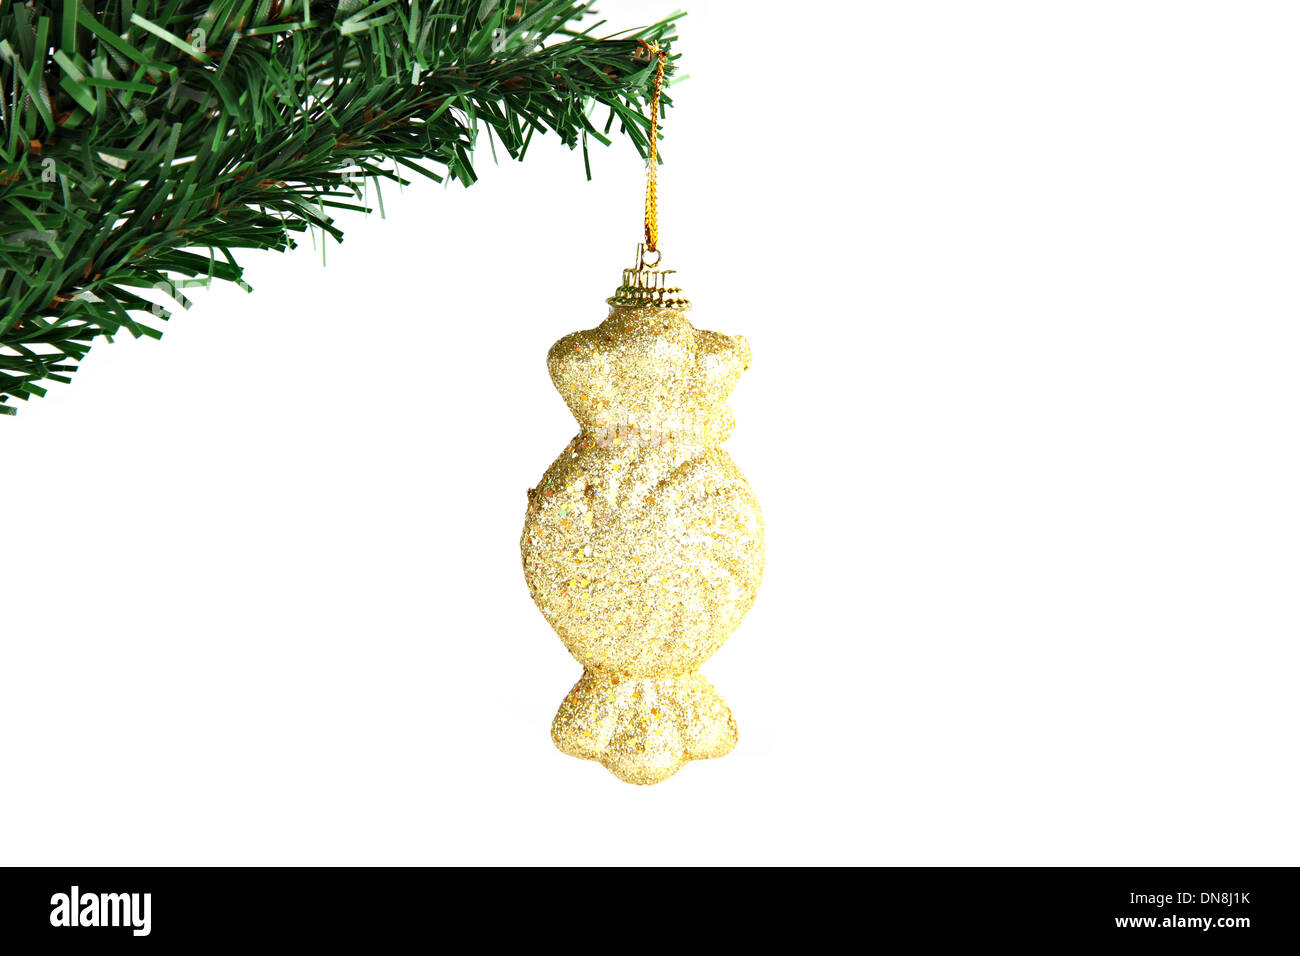 The Picture Golden candy hanging on branch Christmas tree. Stock Photo